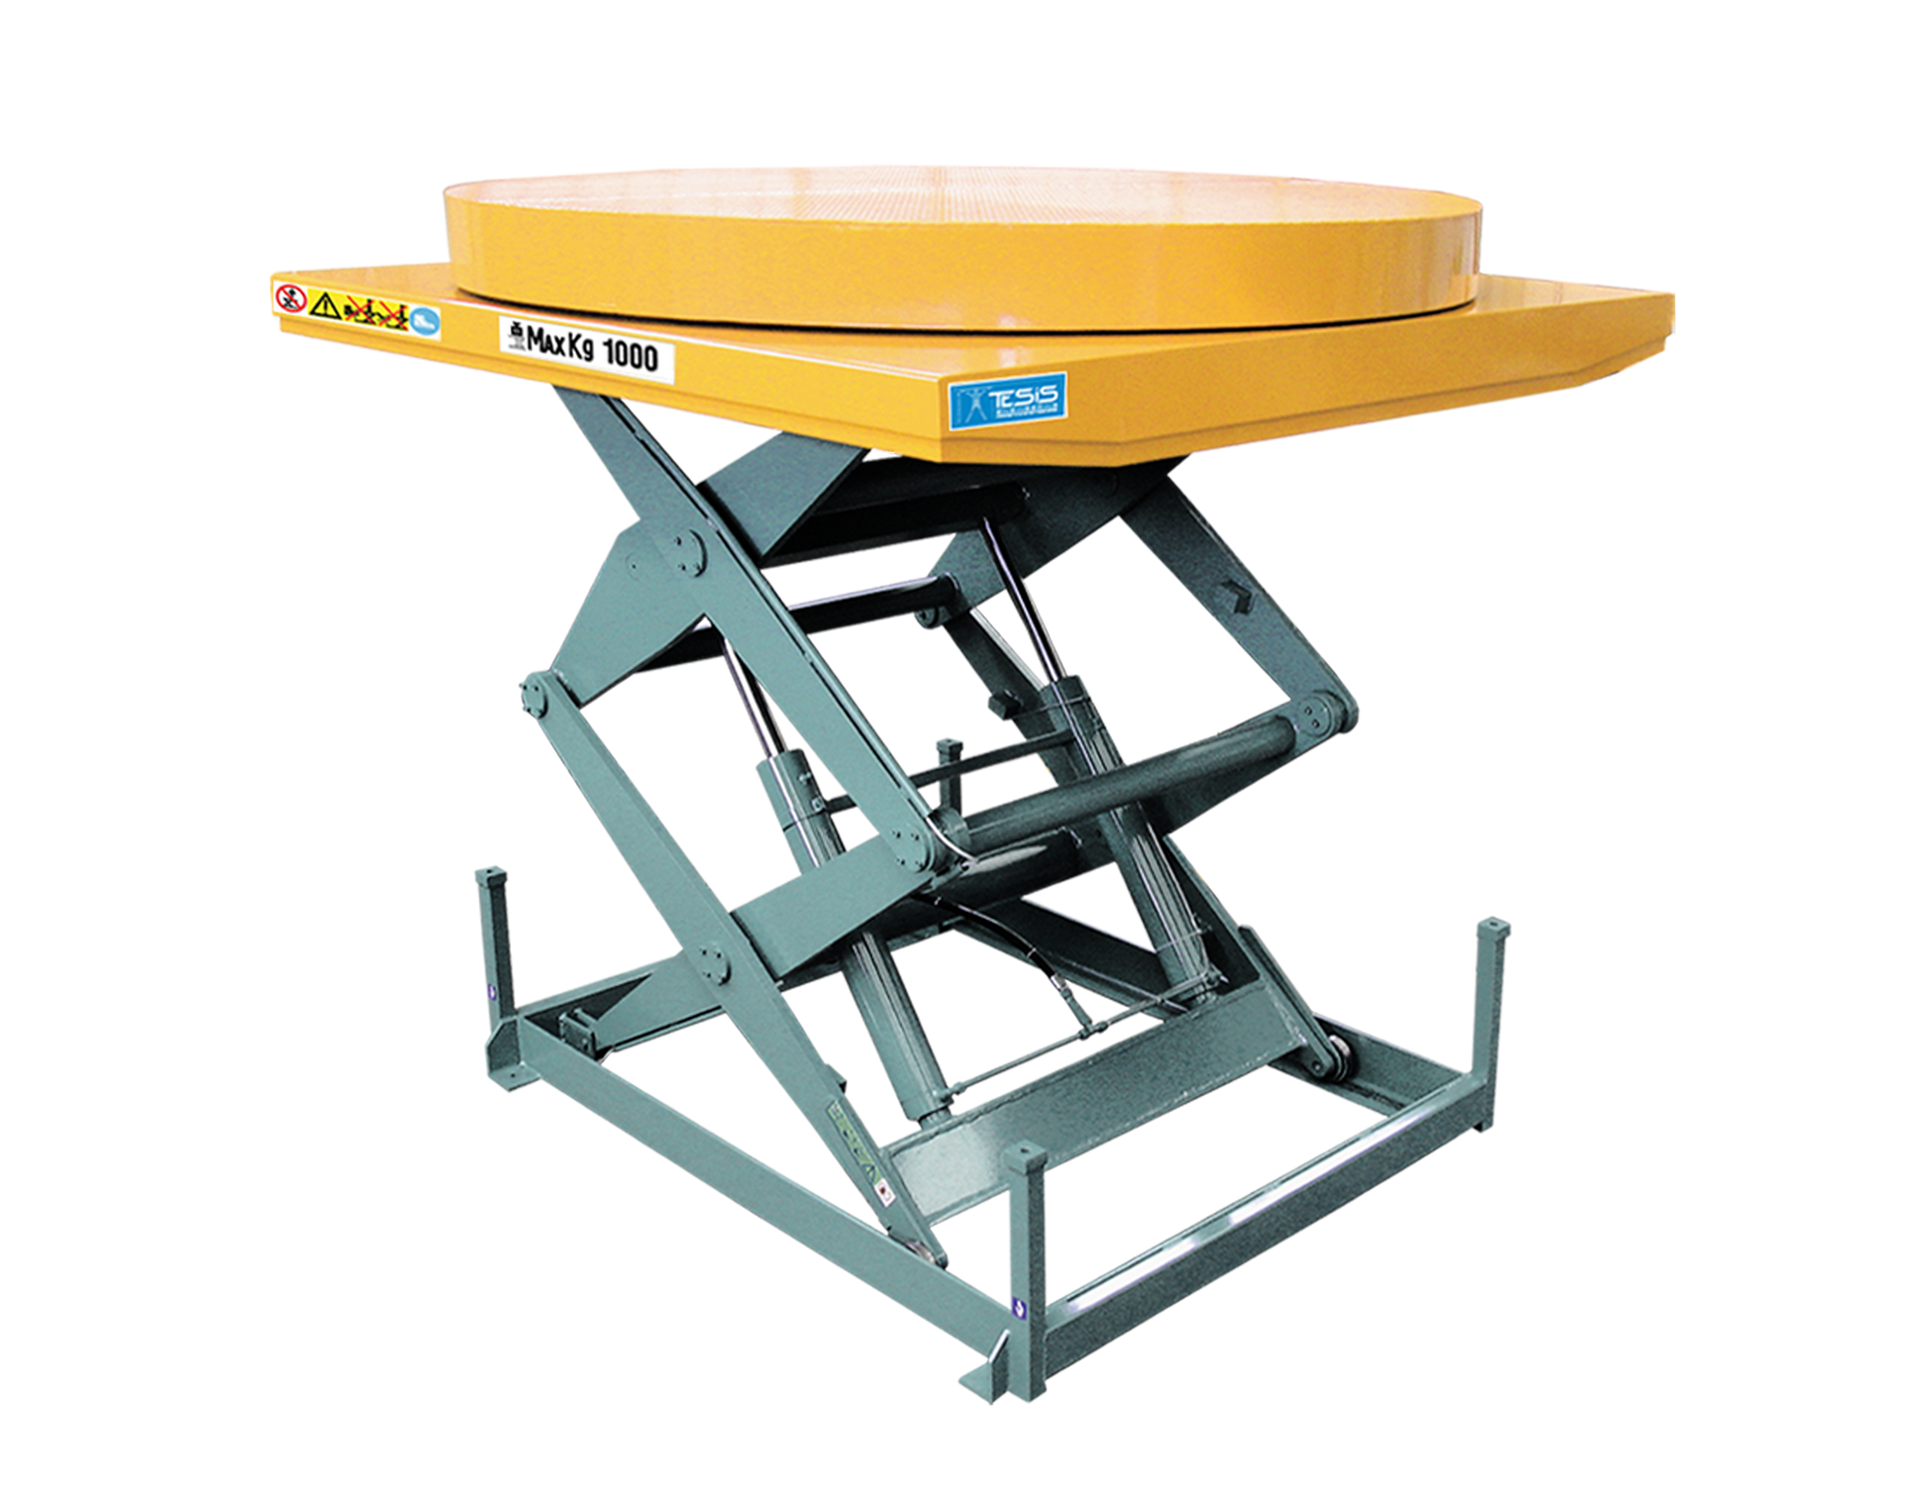 Lifting platform with turntable, turntable lift, scissor lift with turntable